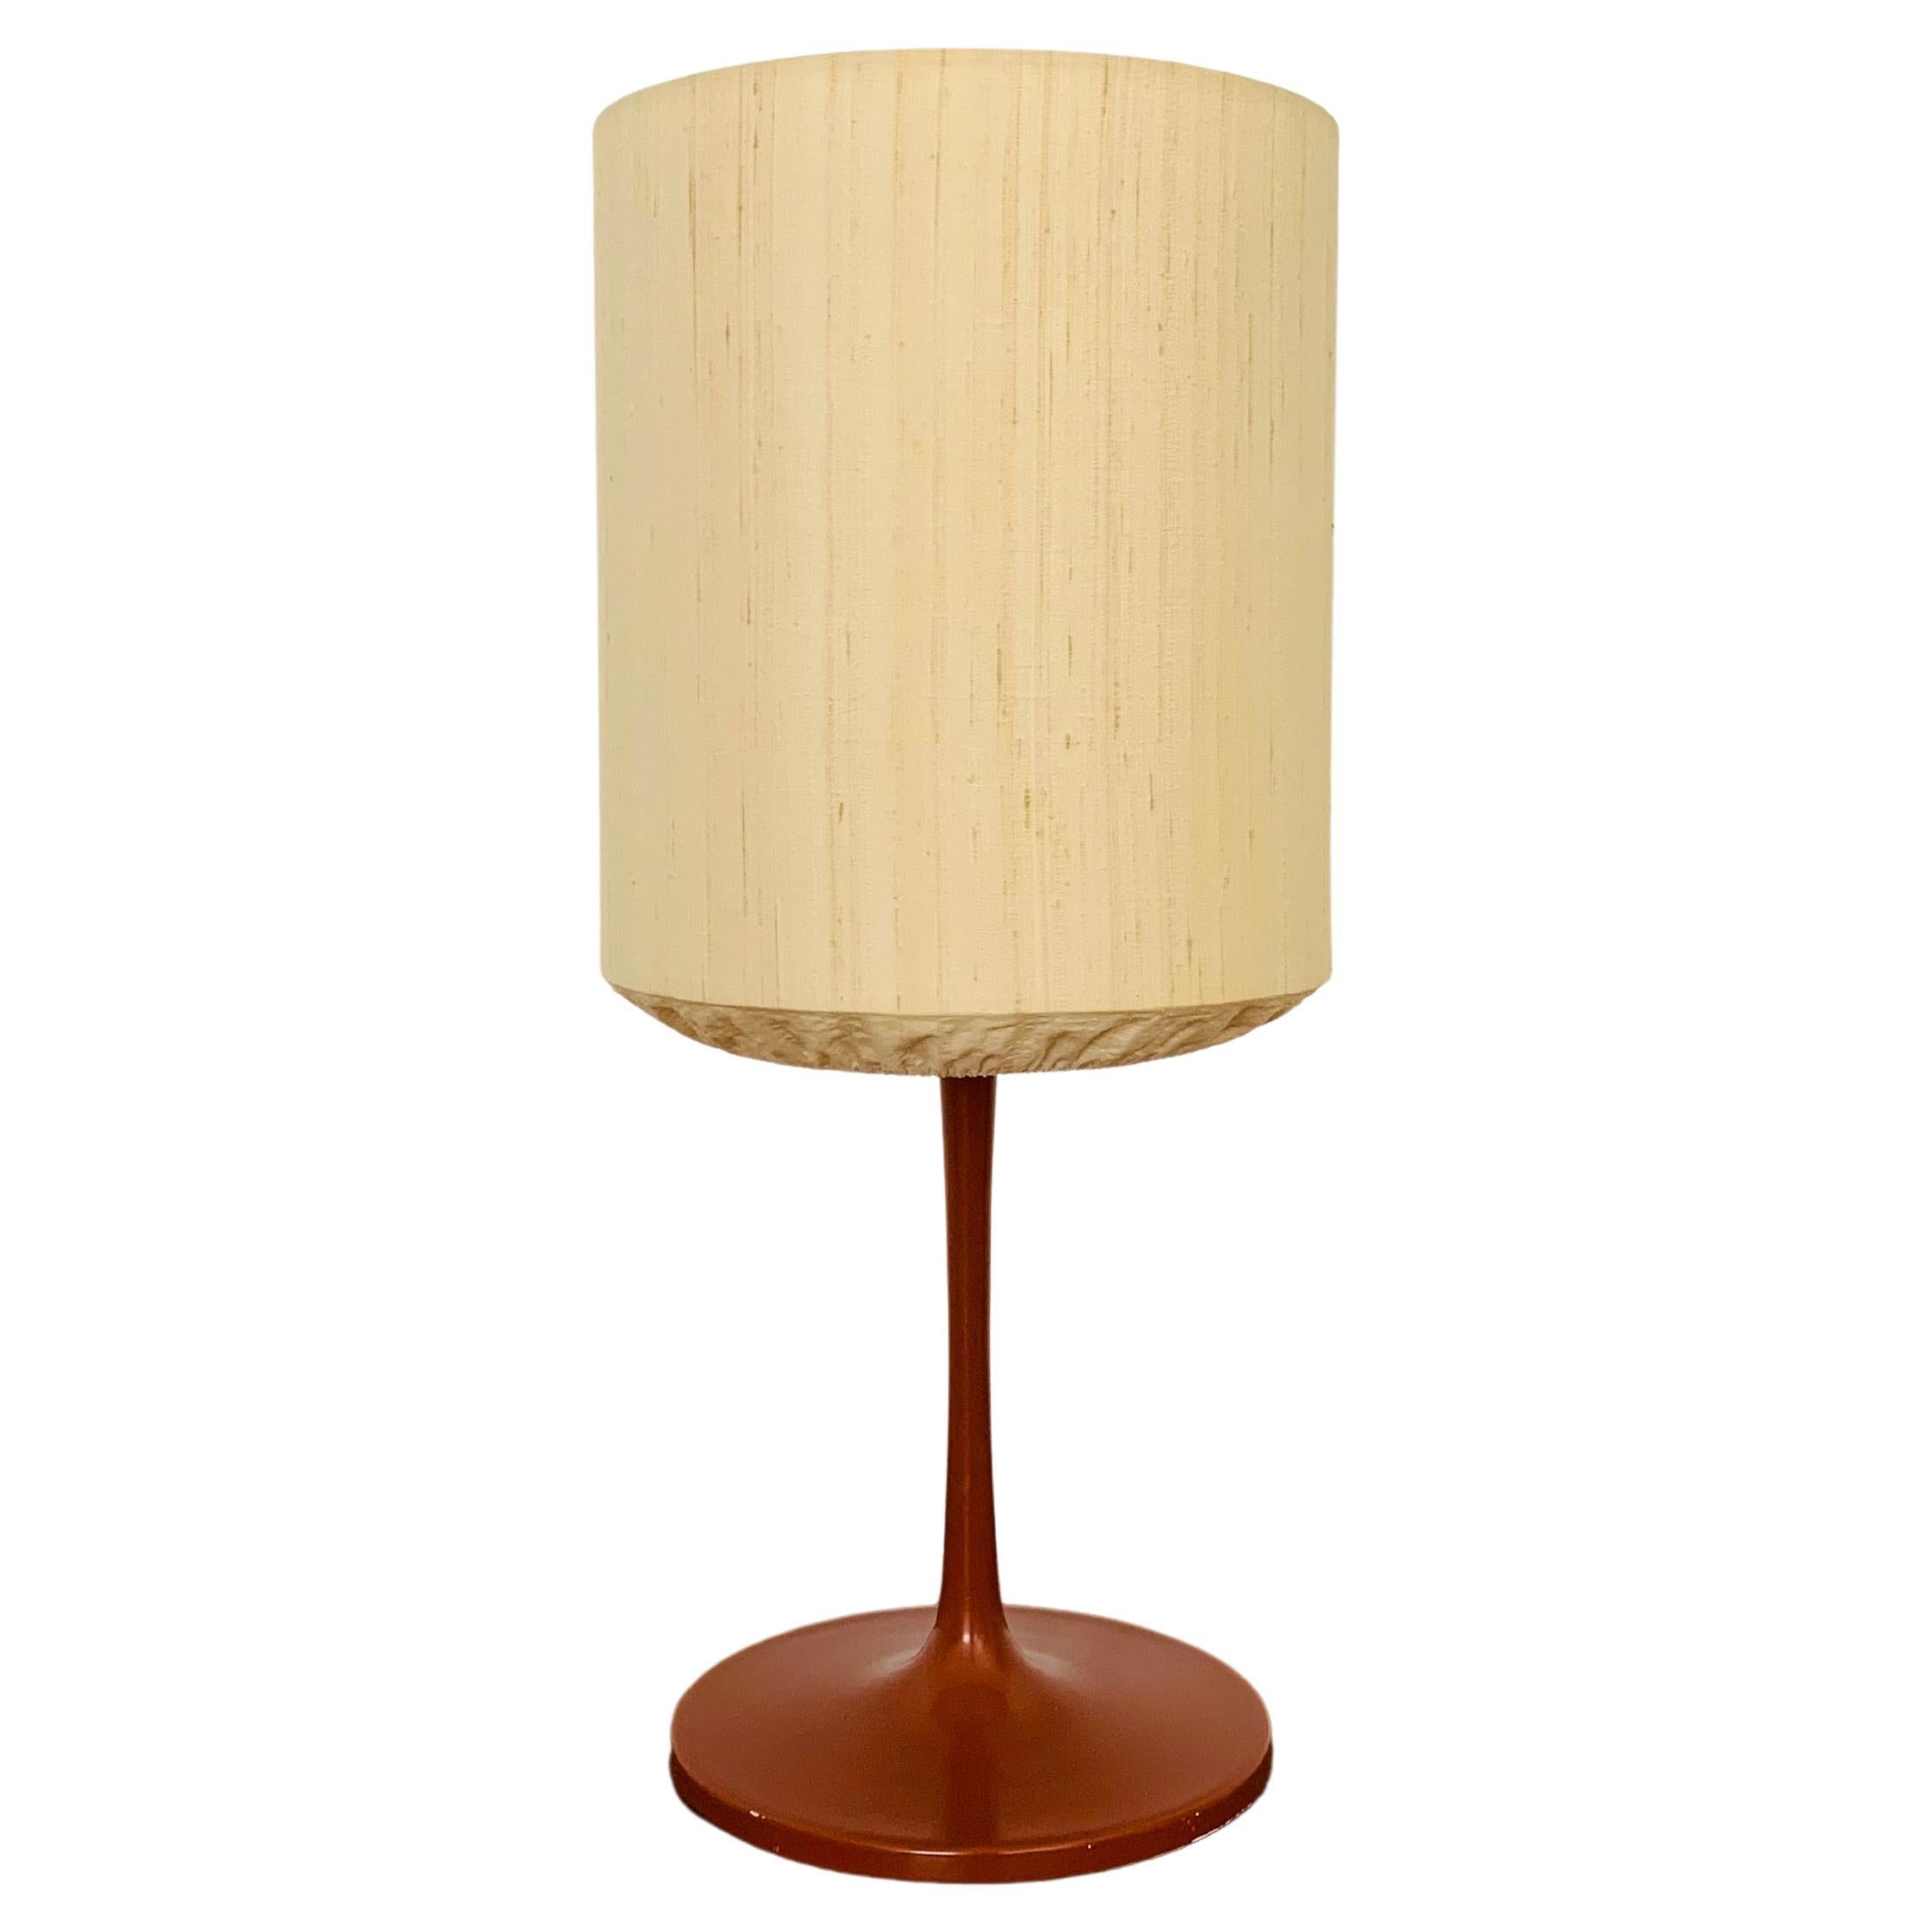 Large 1970s Space Age Table Lamp by Staff